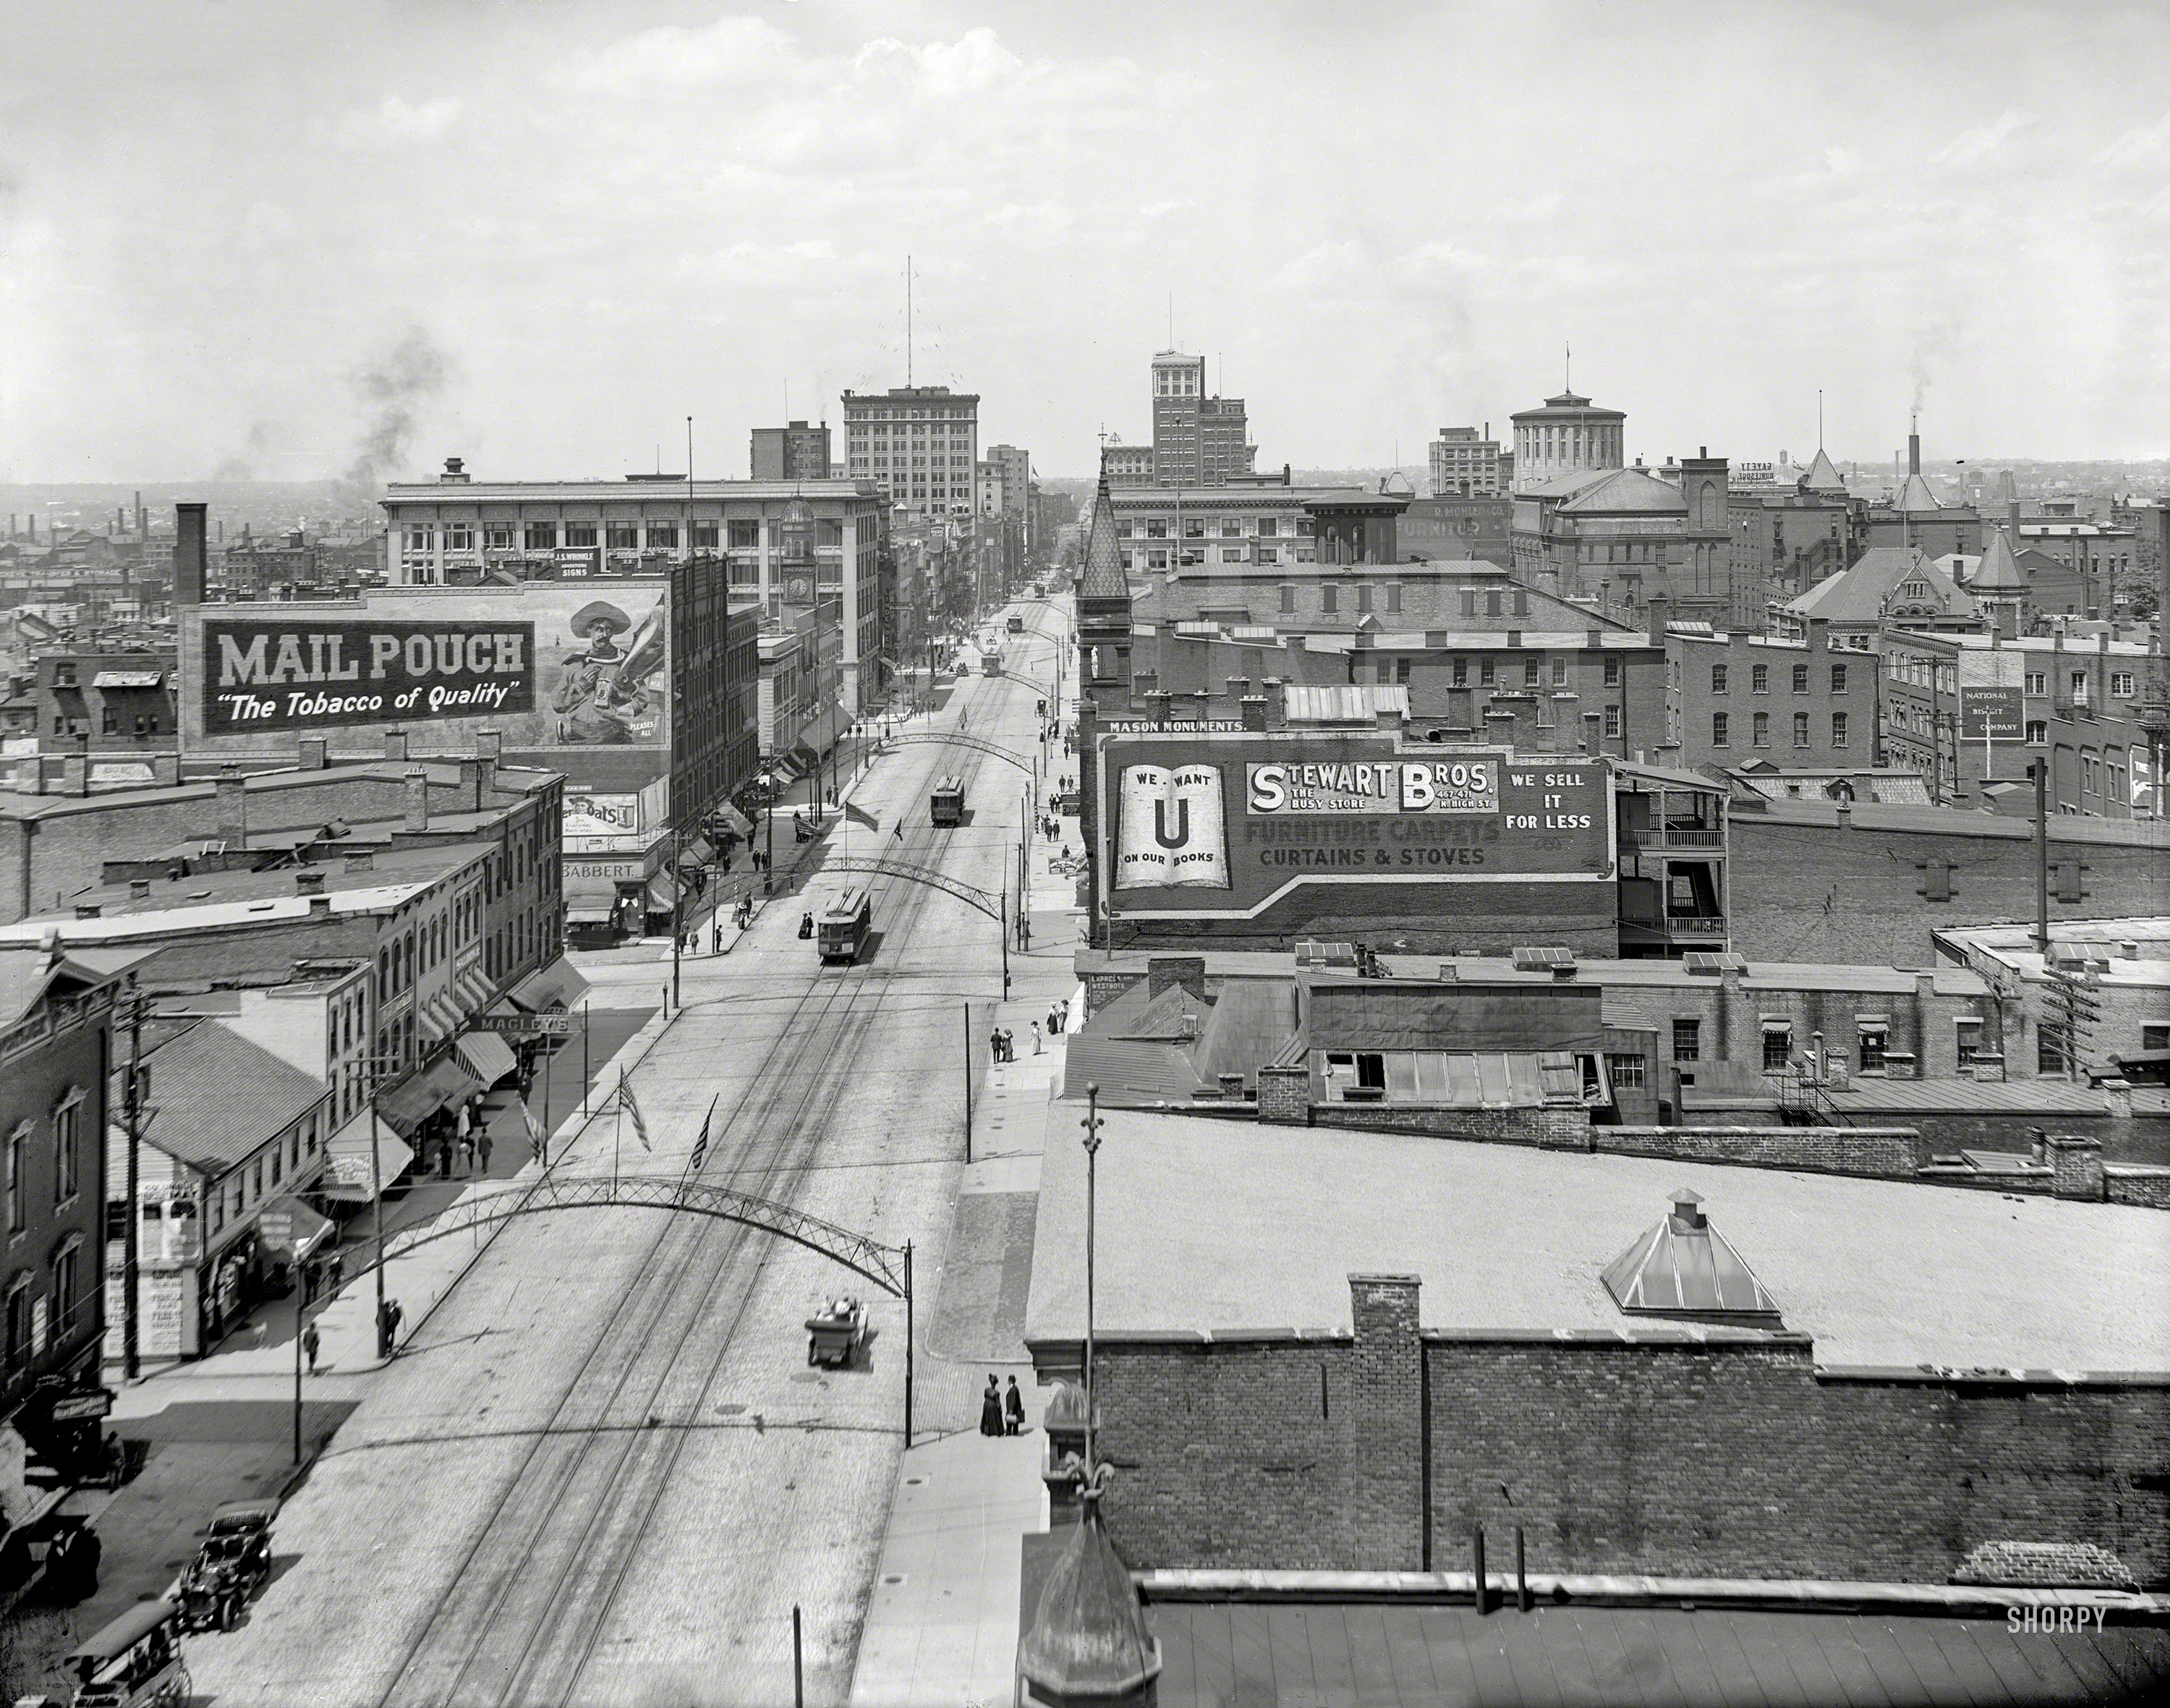 Circa 1910. "Columbus, Ohio, from Great Southern Hotel." Photobombed by the Mail Pouch Tobacco horse. 8x10 inch glass negative. View full size.